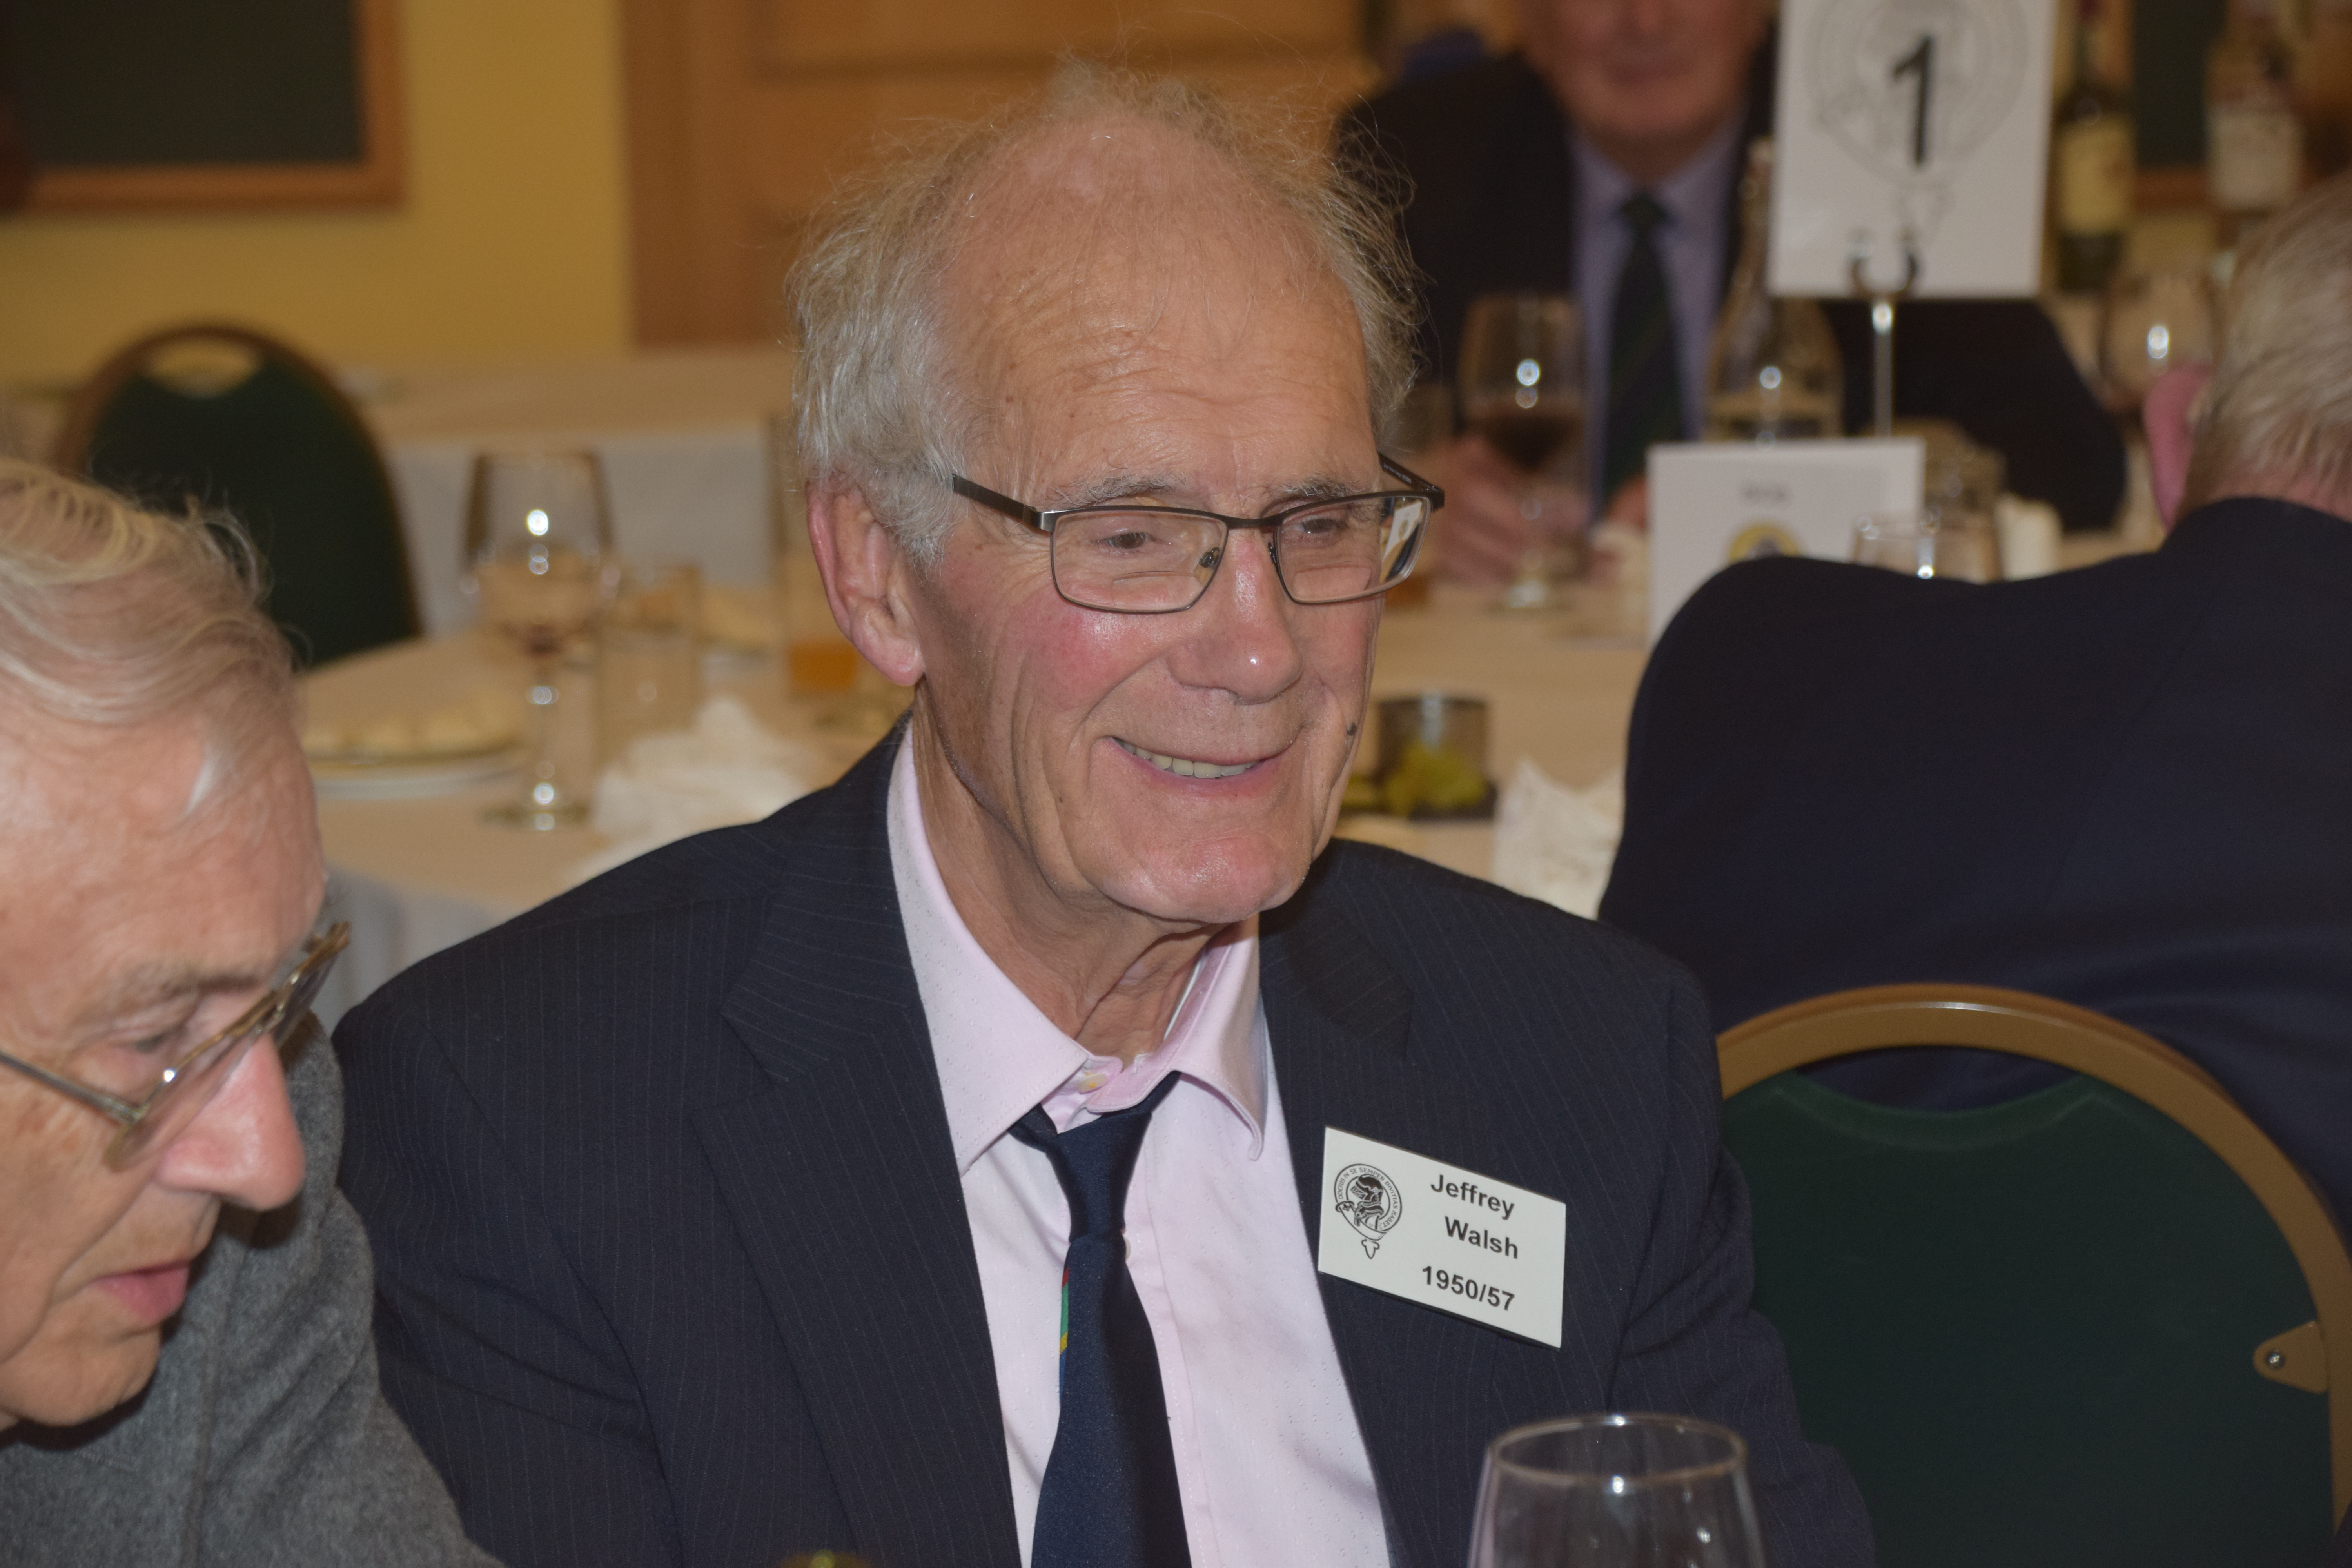 Photograph of Jeff Walsh (1950/57) at Reunion Dinner 2019